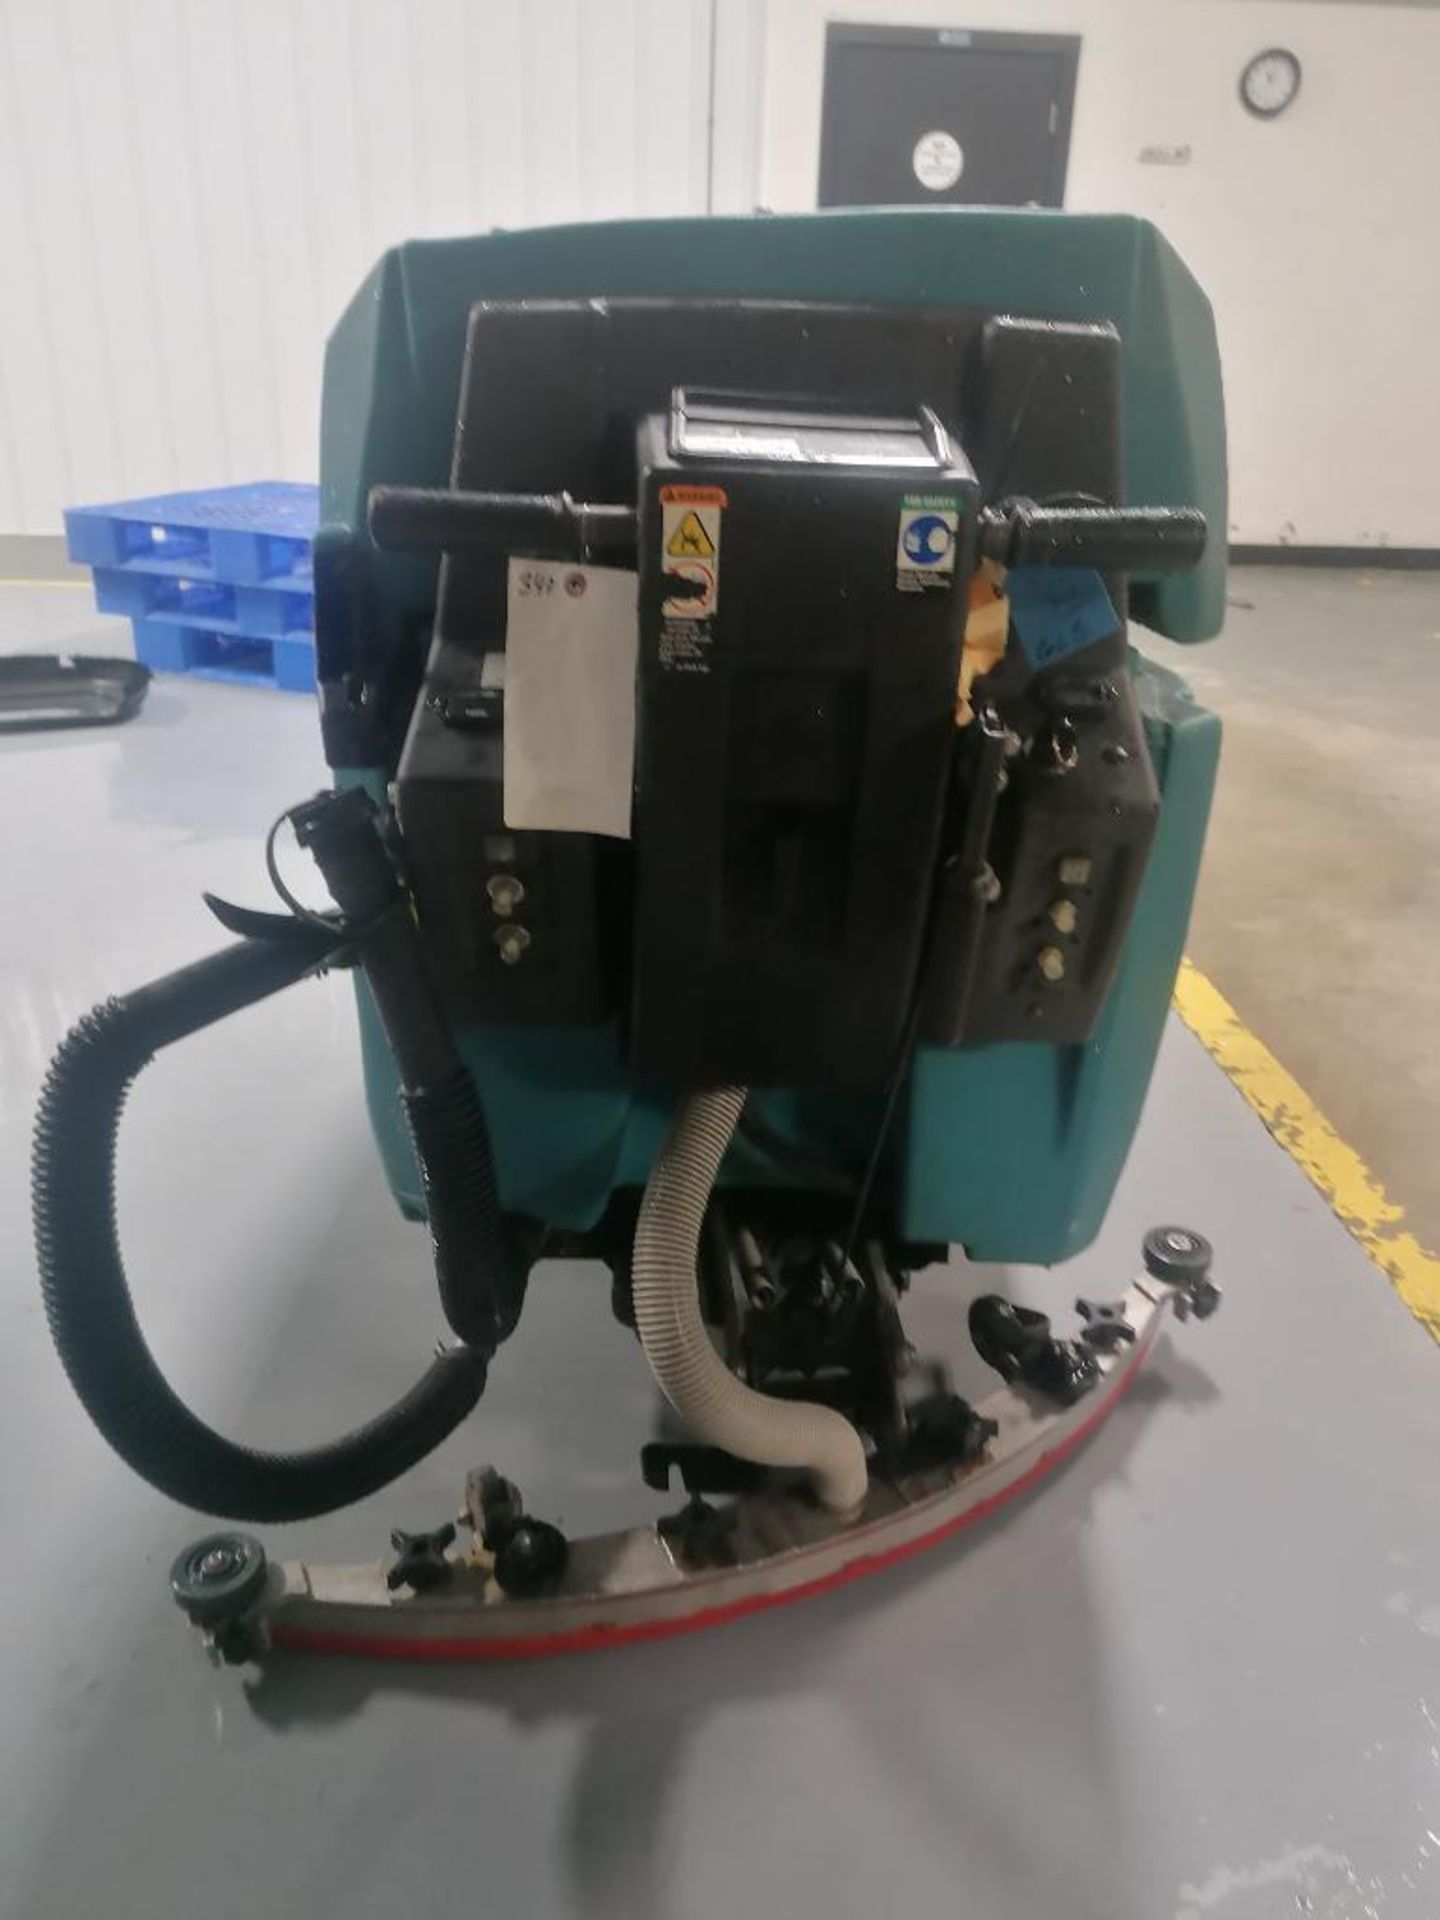 Tennant 5700 Floor Scrubber, Serial #15394, 36 V. Located in Mt. Pleasant, IA. - Image 10 of 16